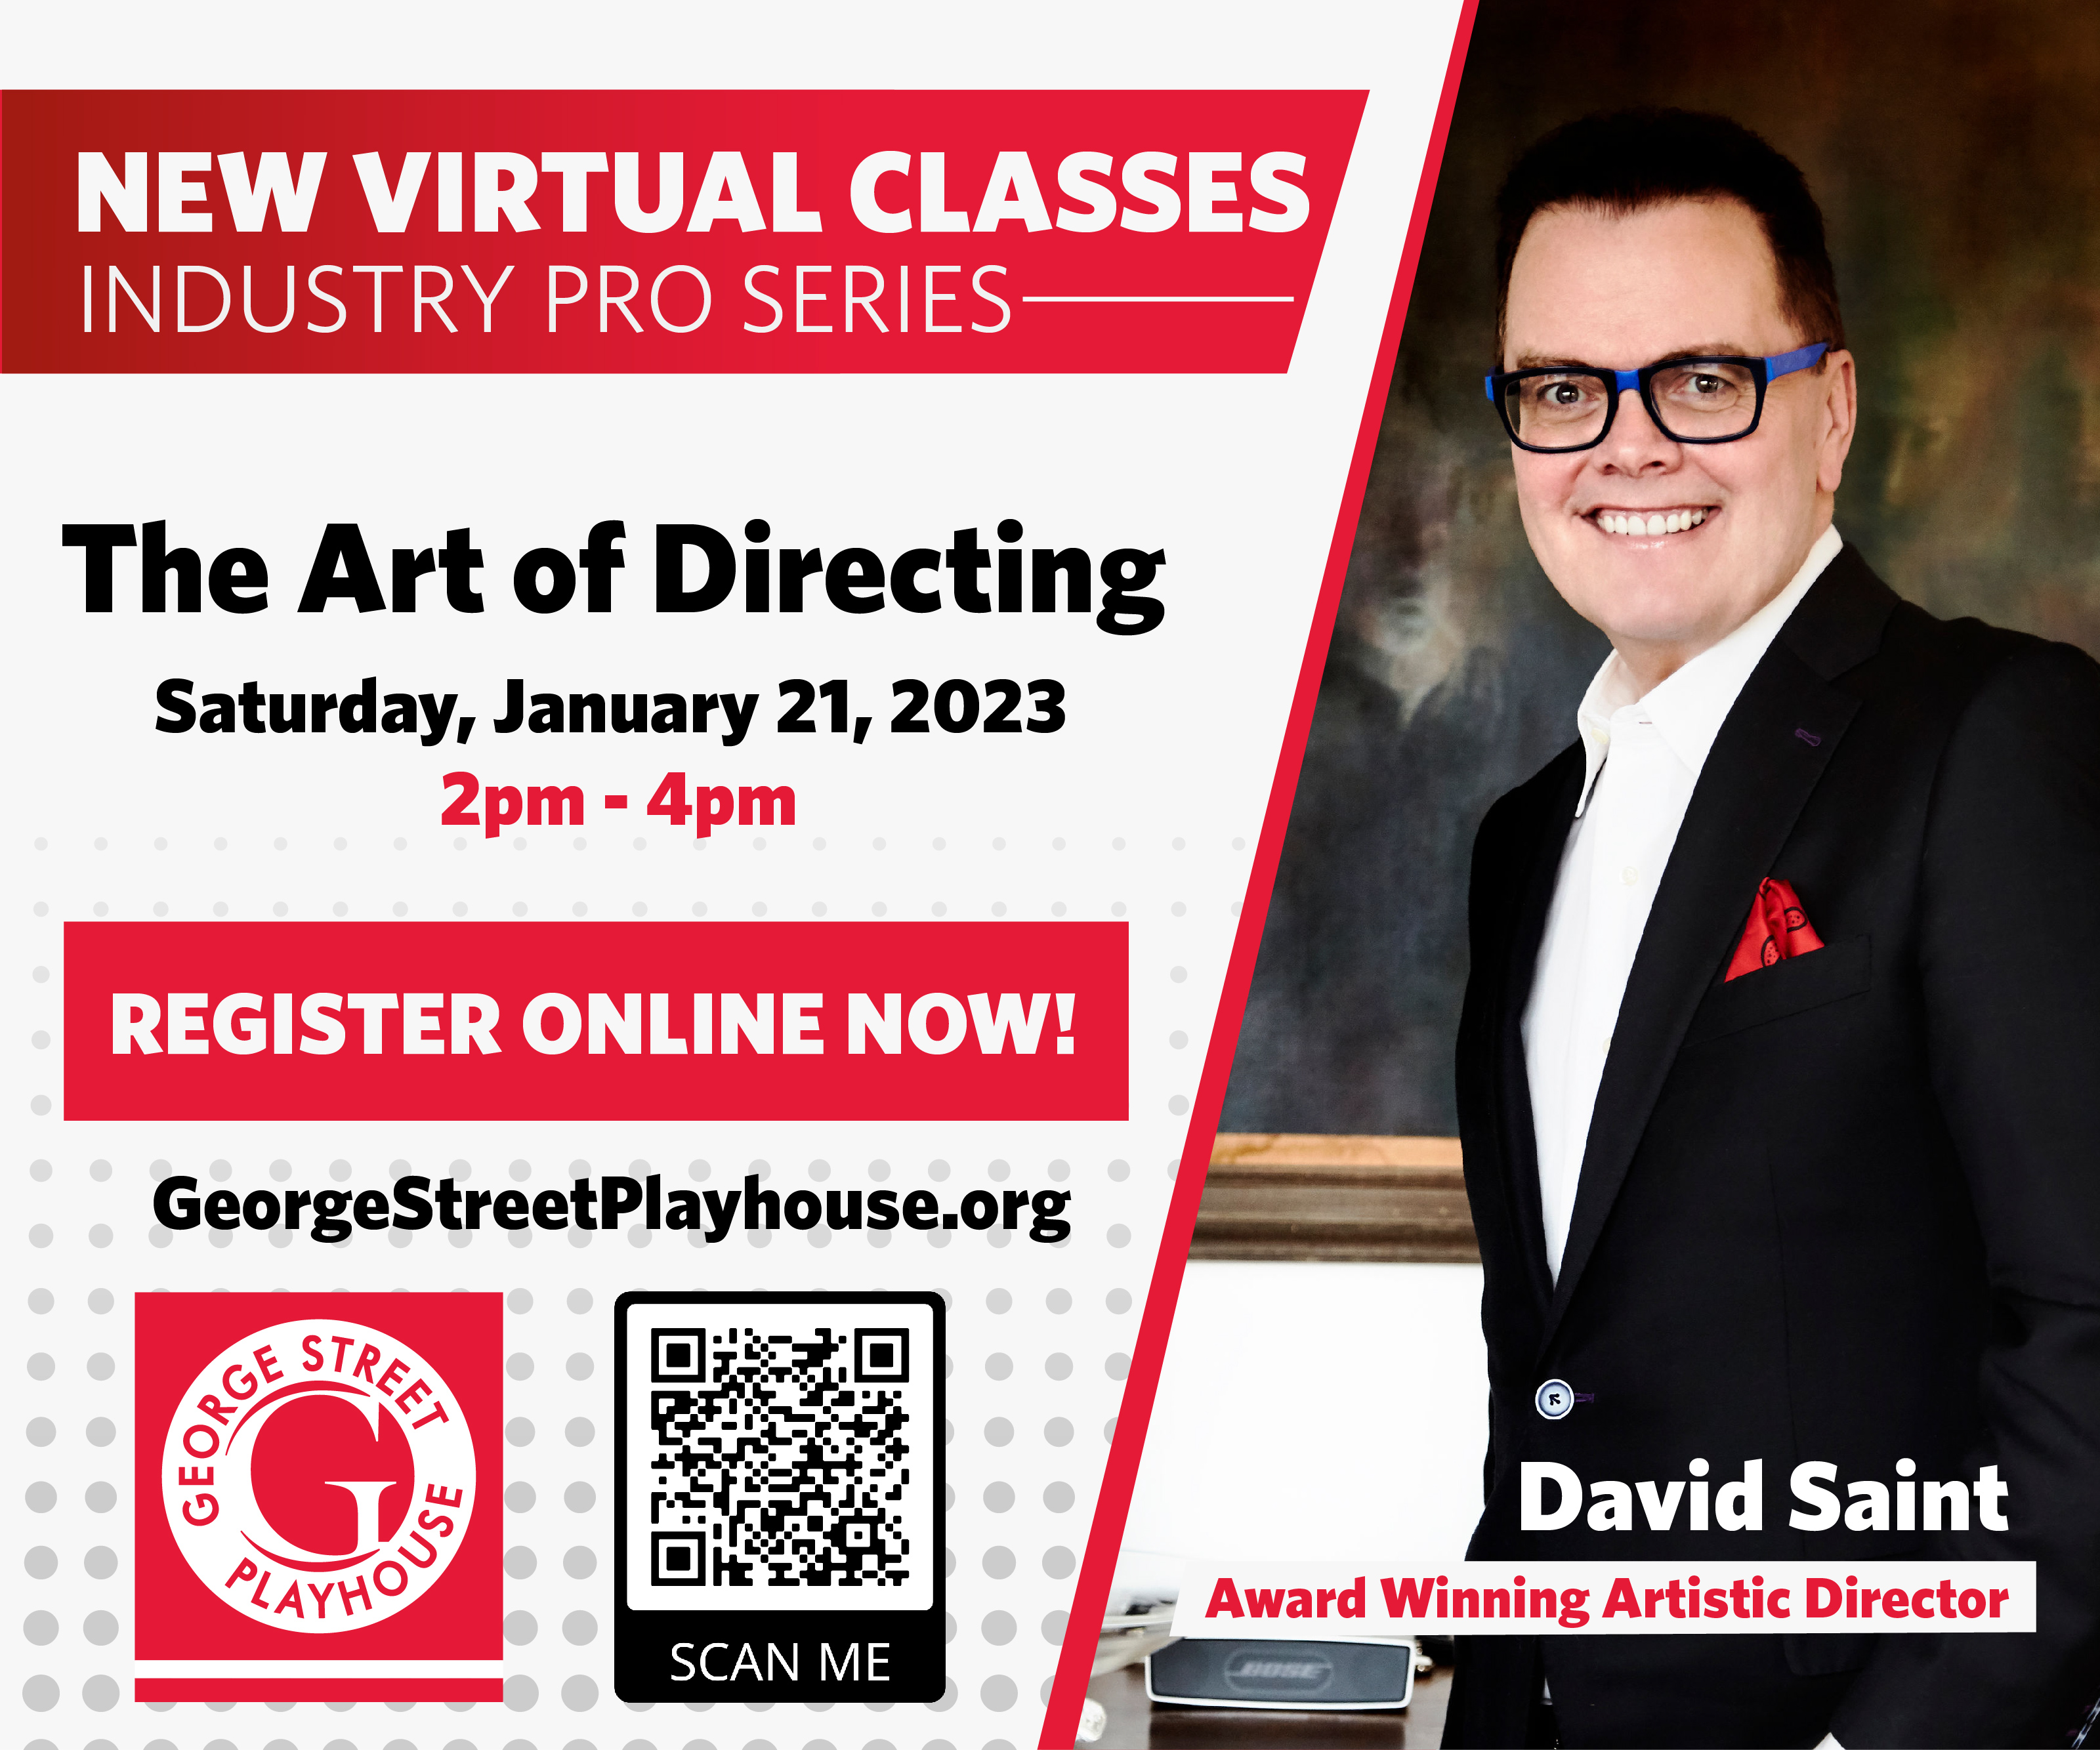 New Virtual Classes: The Art of Directing. Register Online Now